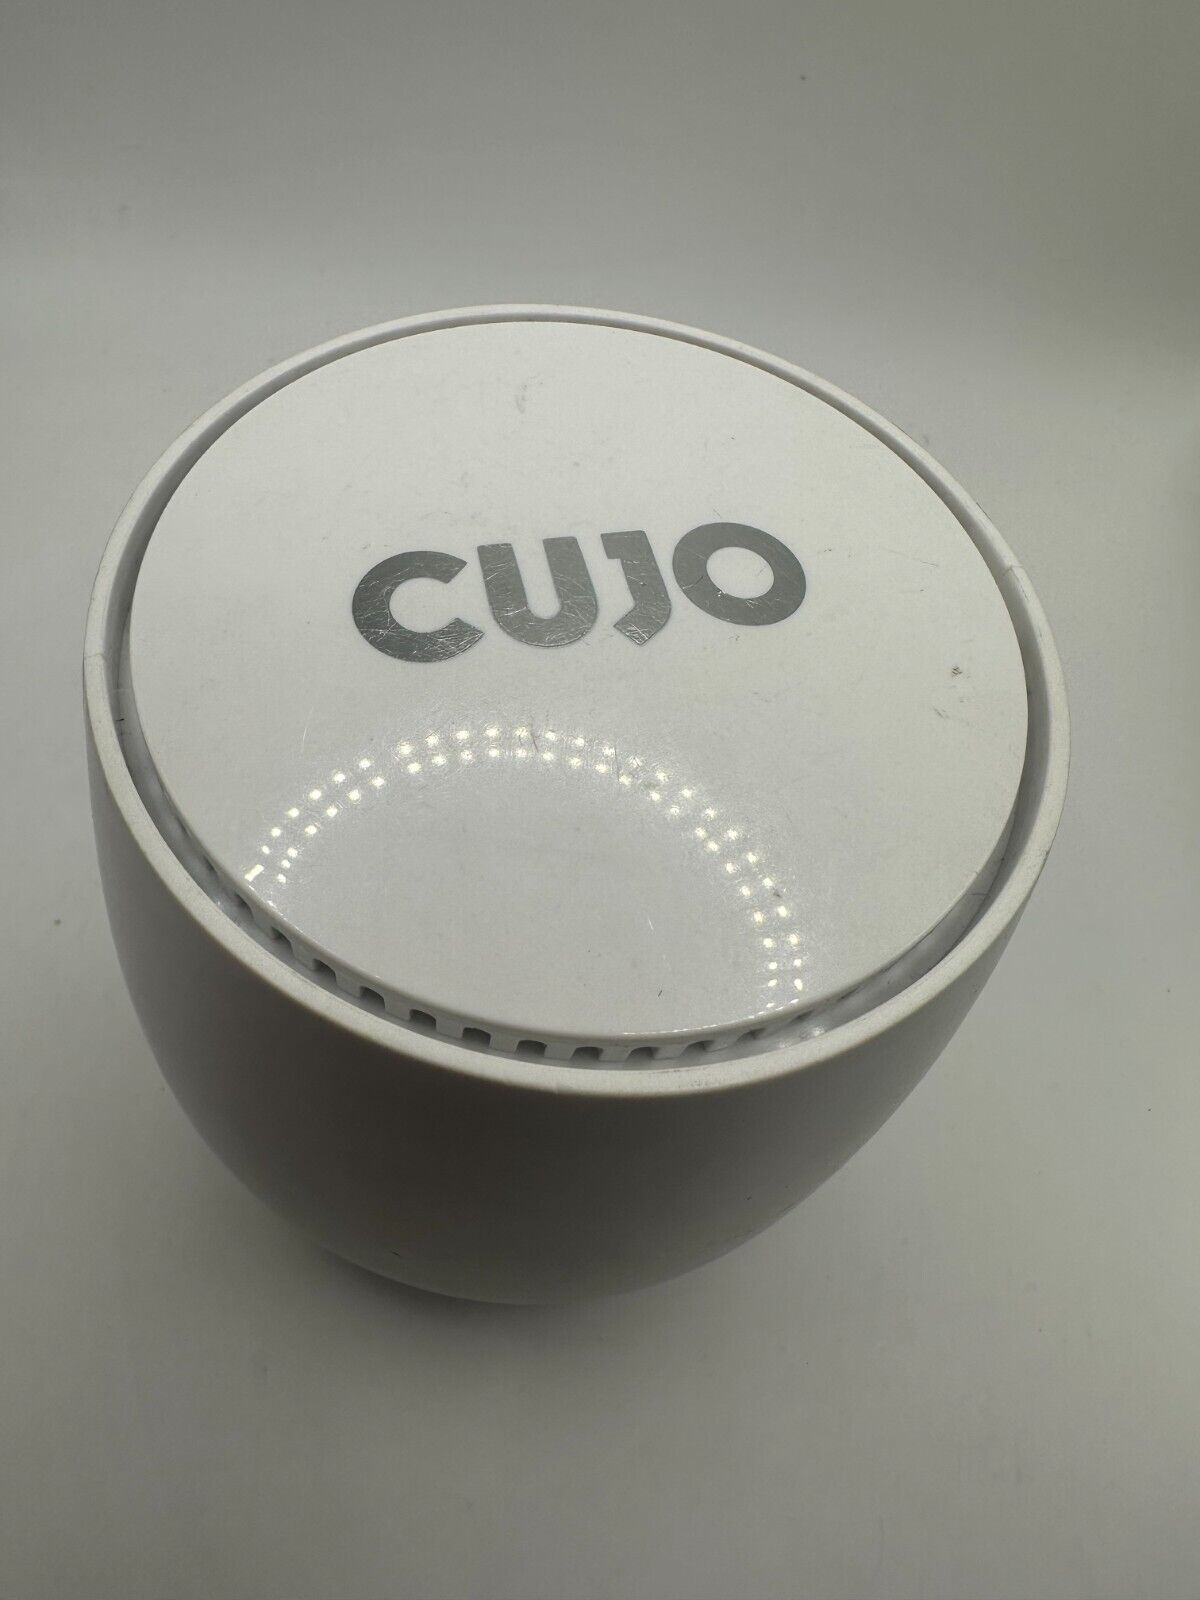 CUJO Smart Internet Security Hacking Virus Protection (A0001) Device ONLY